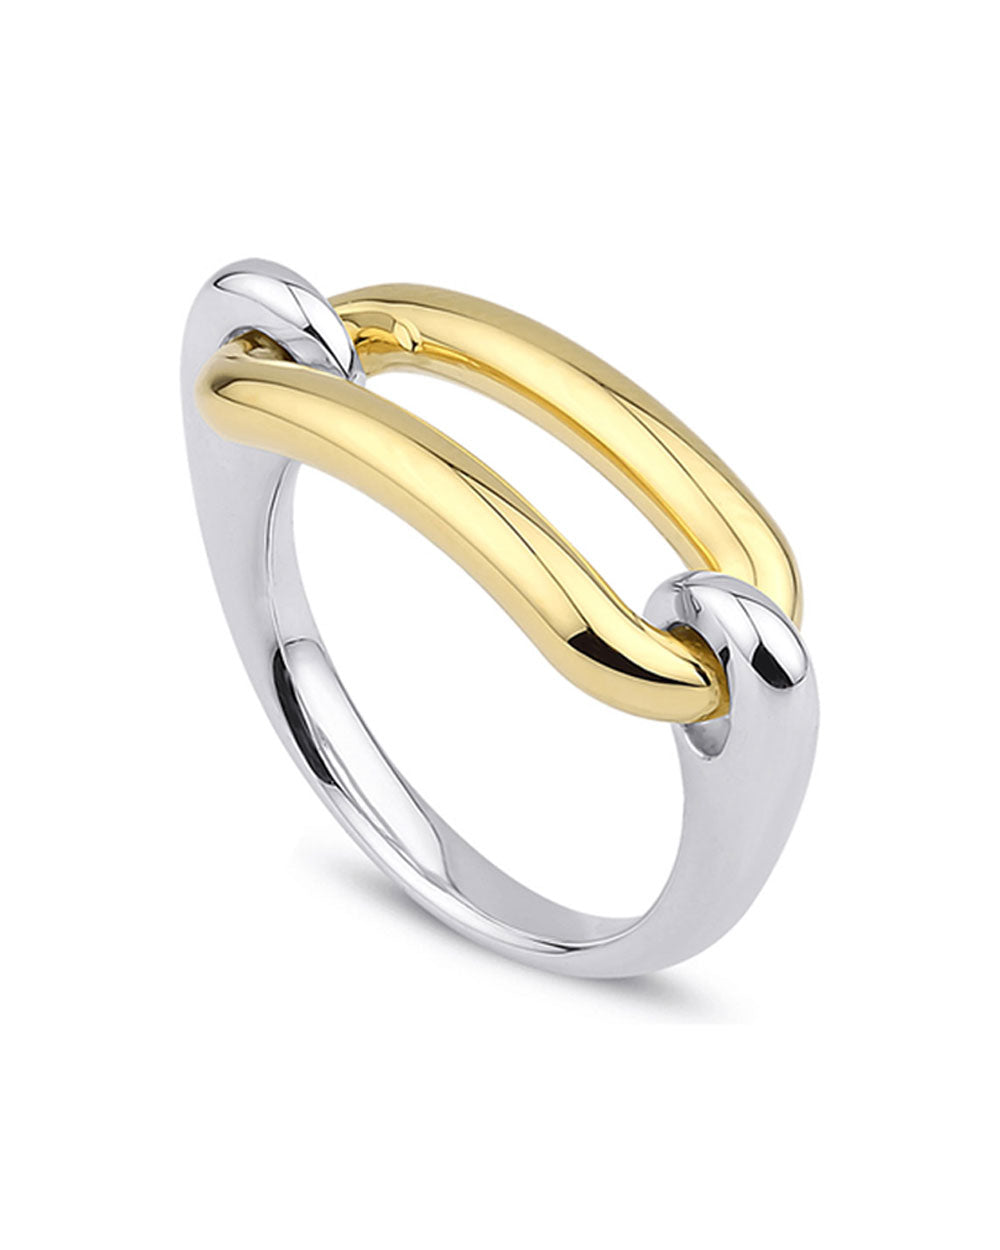 18k Yellow Gold and Sterling Silver Una Ring